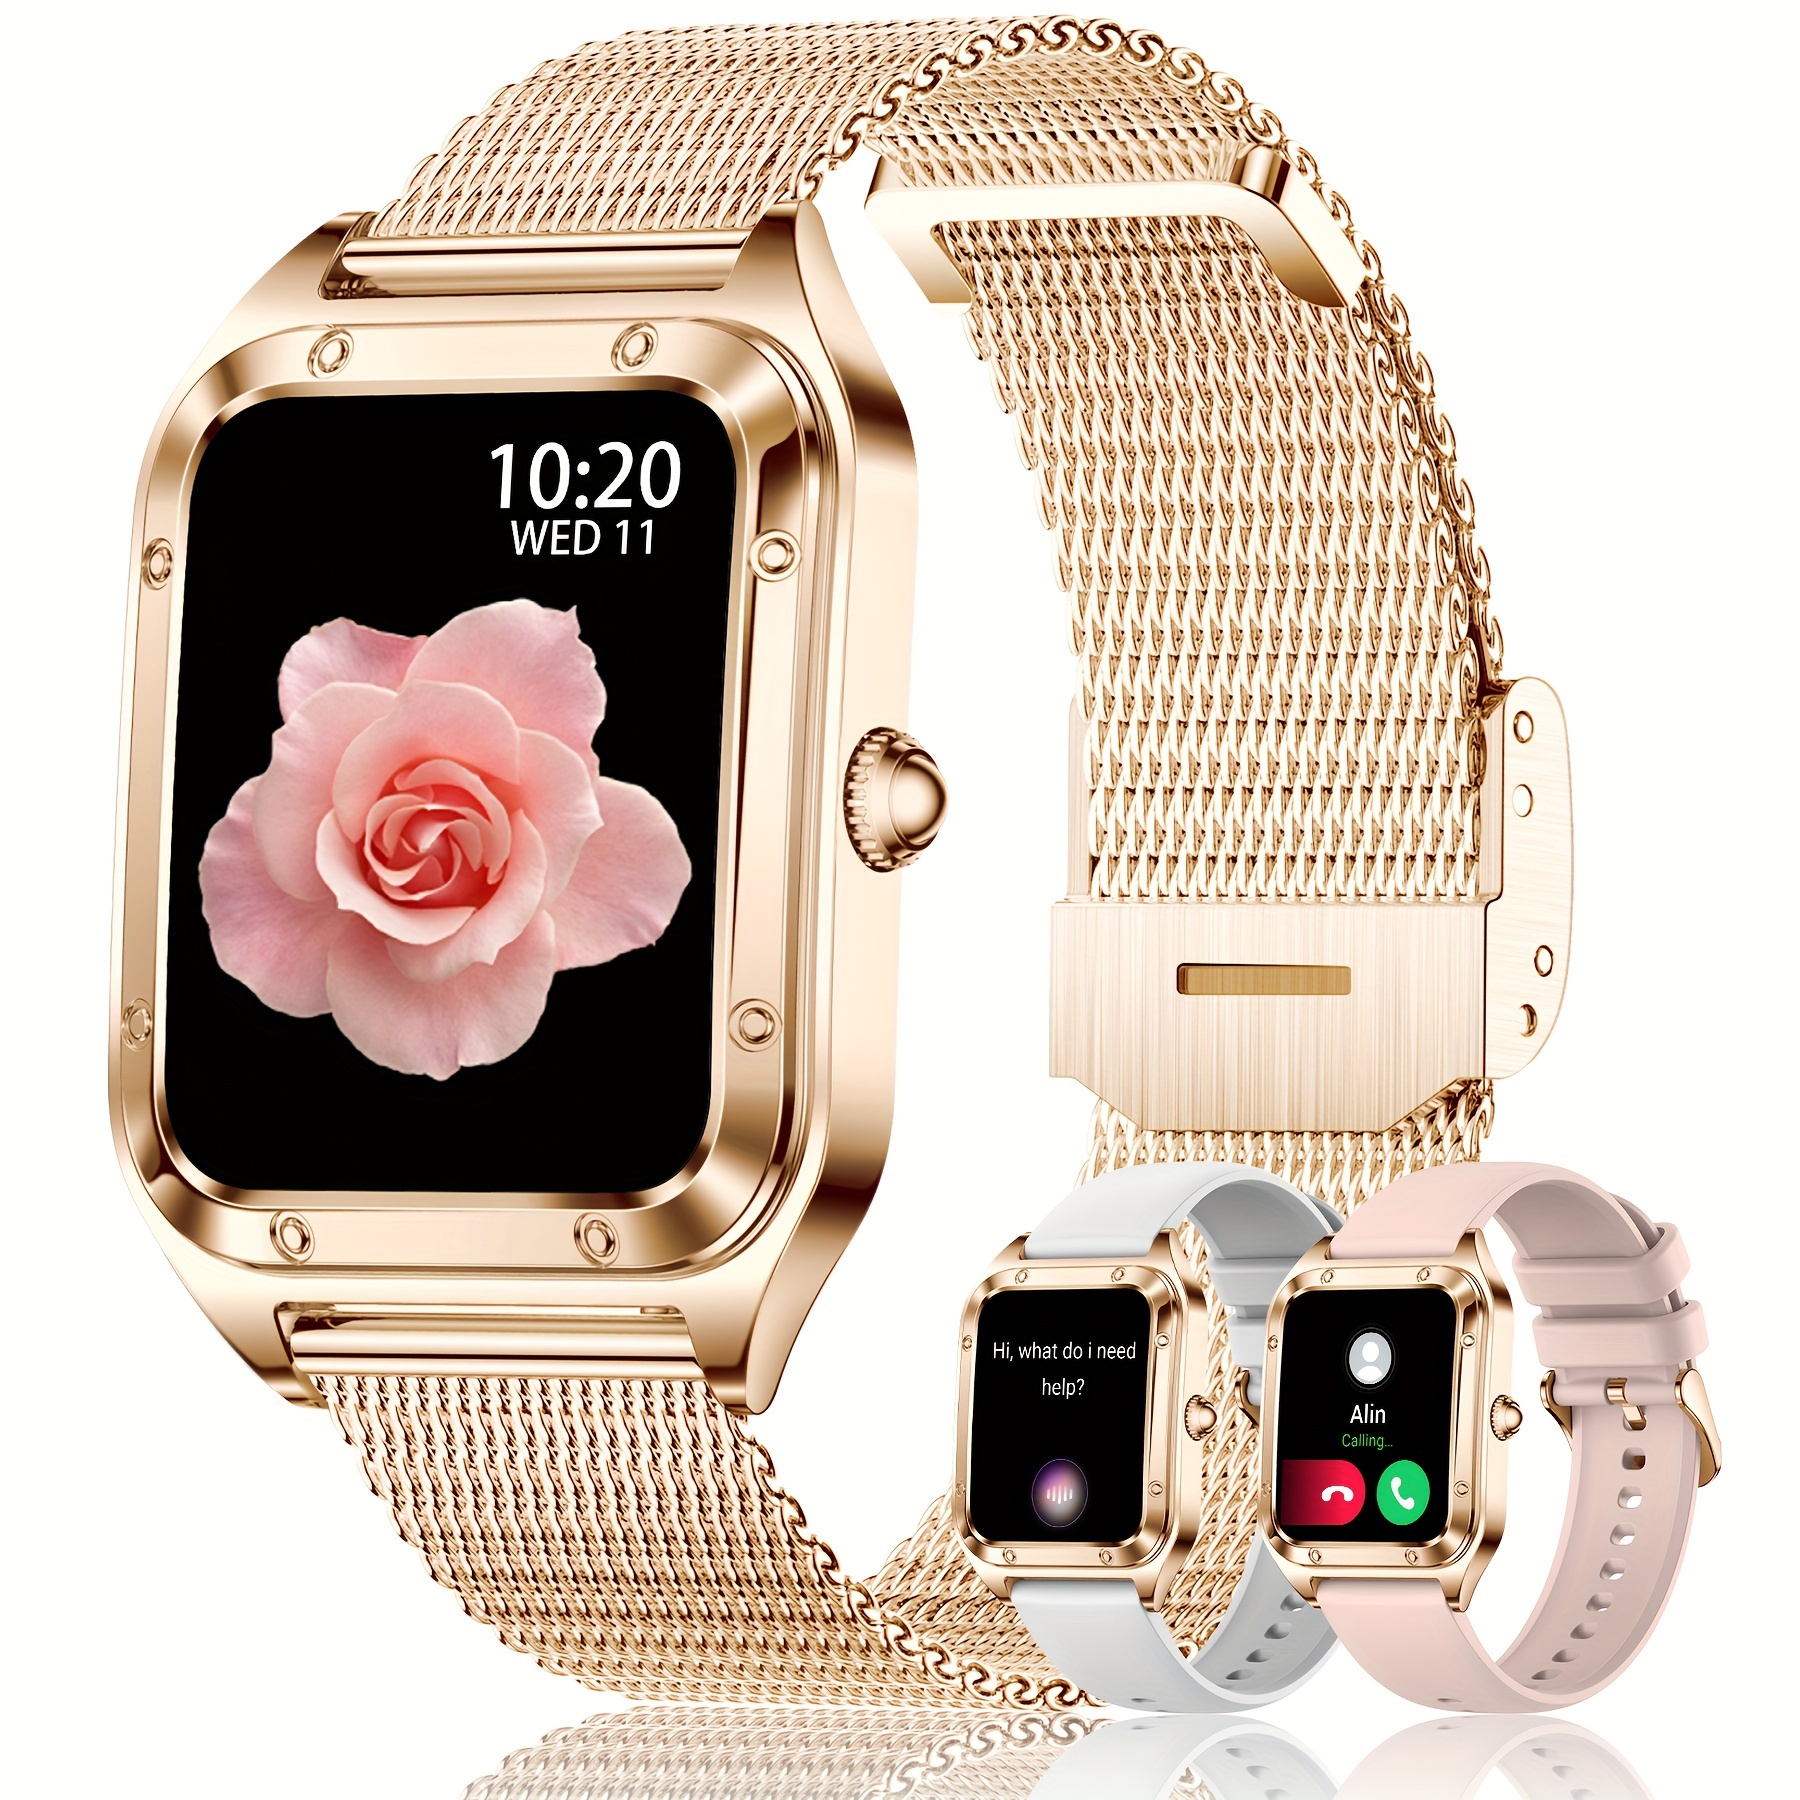 

Smart Watch For Women Wireless Call Smartwatch With Vioce Assistant Female Functions, 19 Sports Modes, Music Player, Pedometer Perfect Birthday Gift For Women